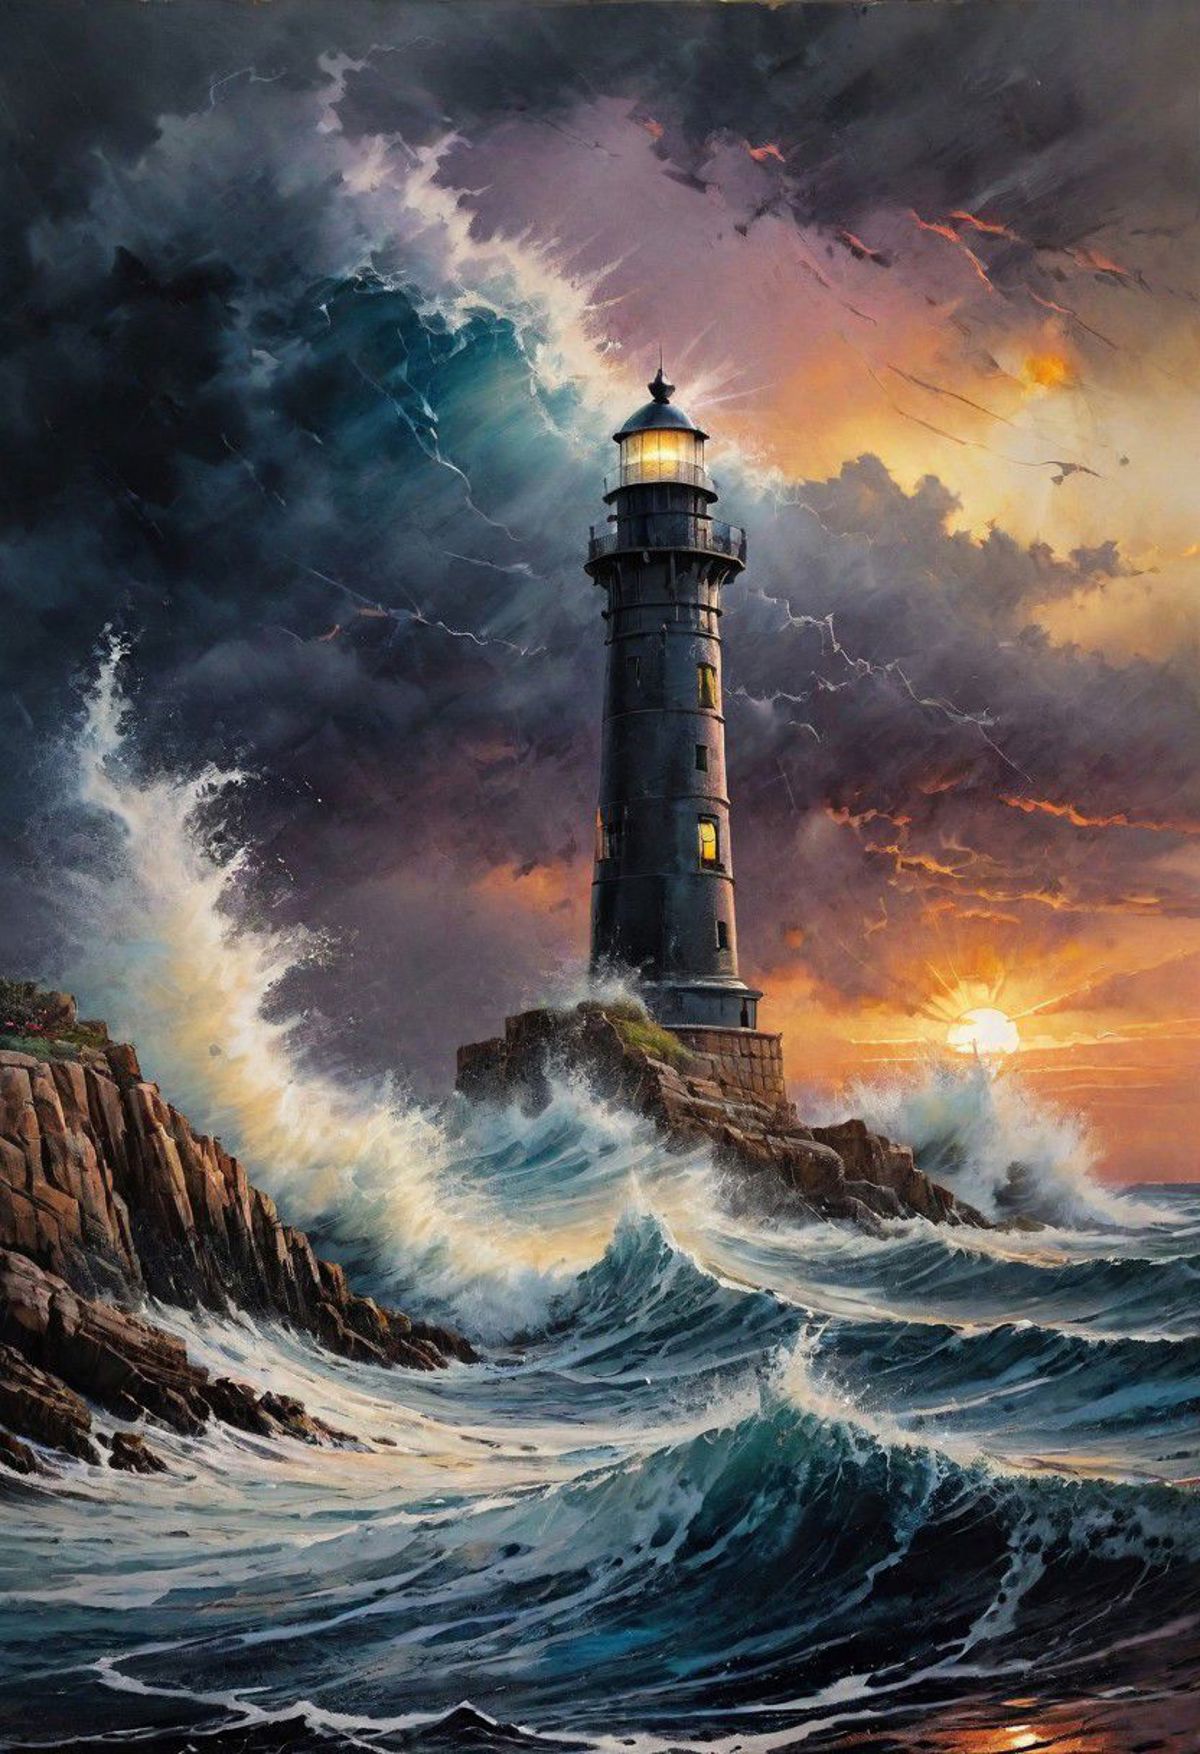 A painting of a lighthouse at sunset on a rocky shore